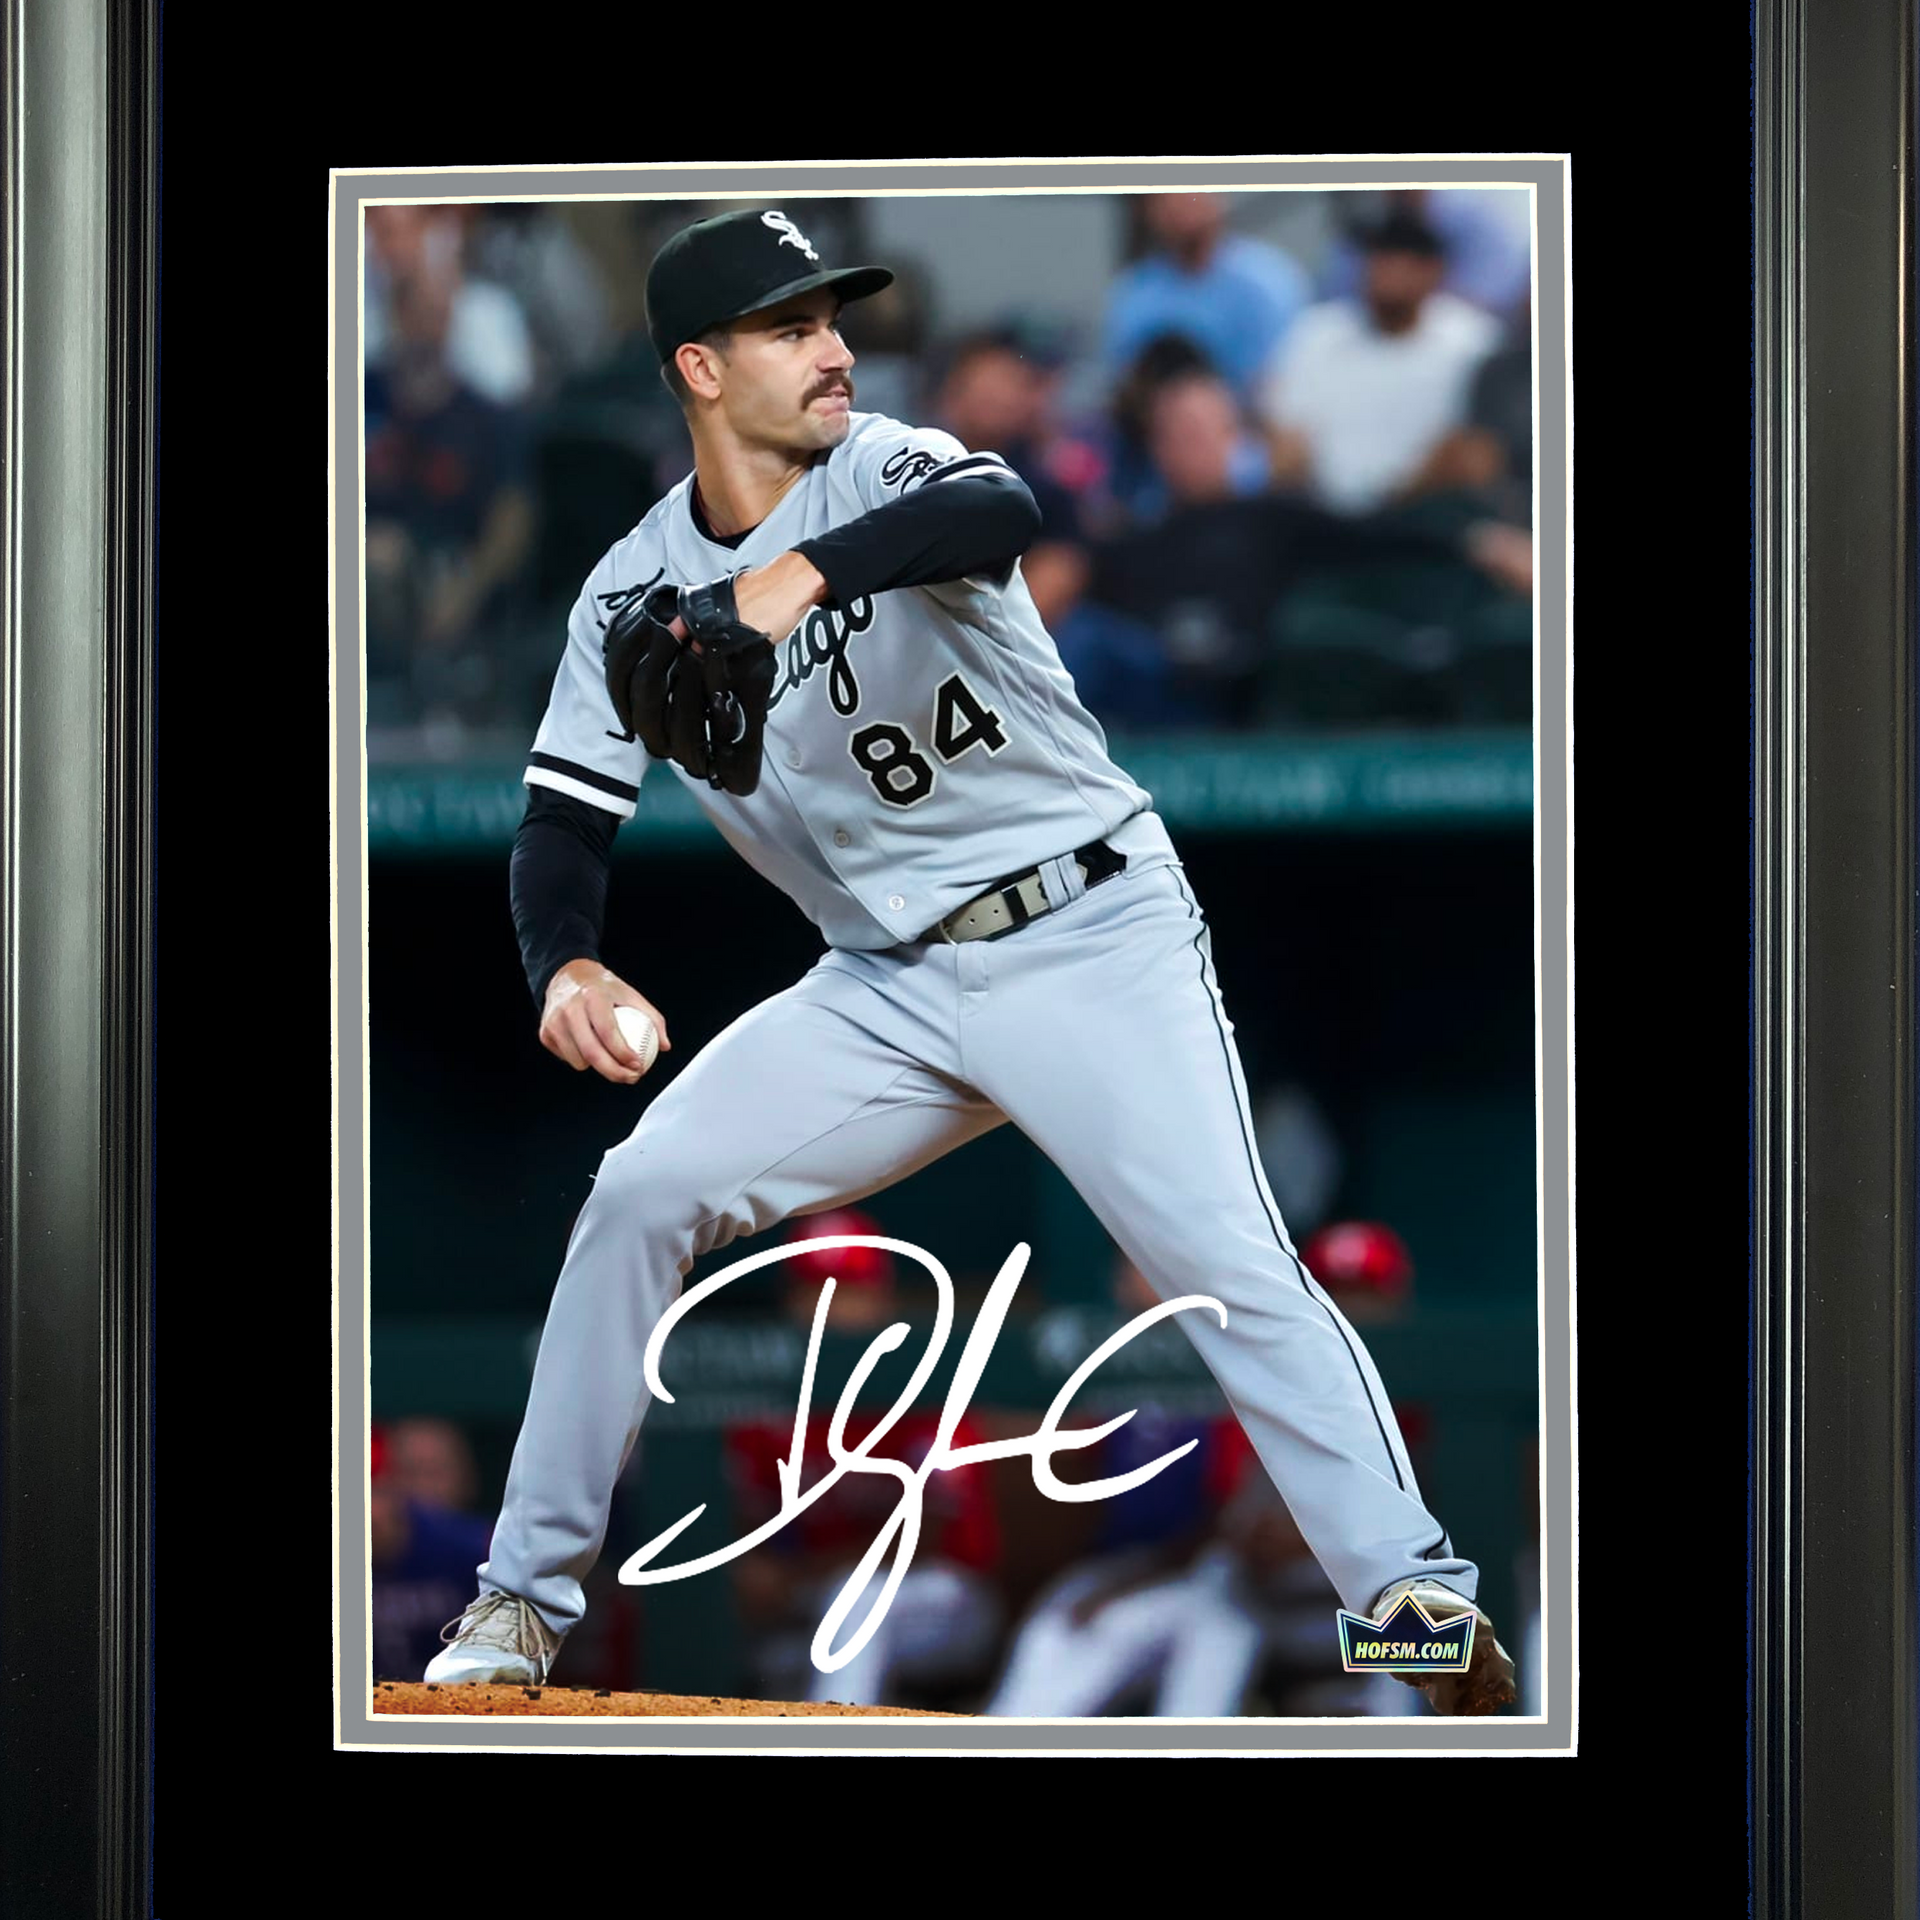 Framed Dylan Cease Facsimile Laser Engraved Signature Auto Chicago White Sox  12x15 Baseball Photo HOFSM Holo - Hall of Fame Sports Memorabilia